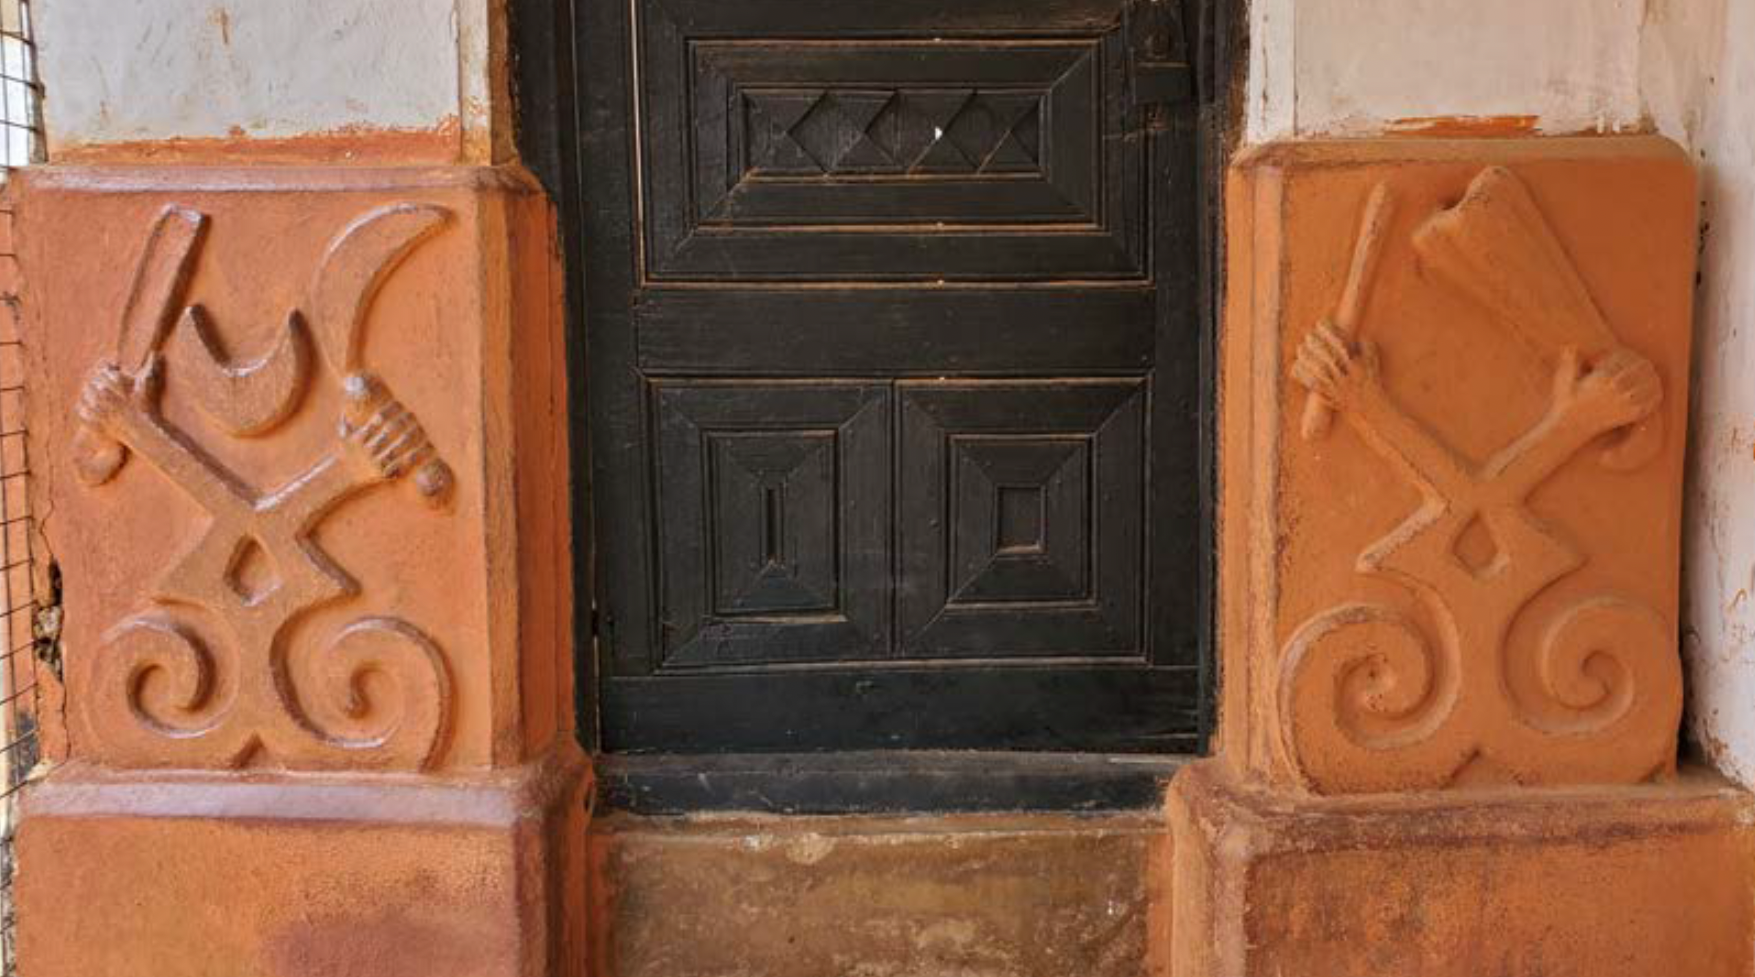 View of a building showing carved wooden door and clay walls, the upper parts white and the lower parts red, with raised geometric designs